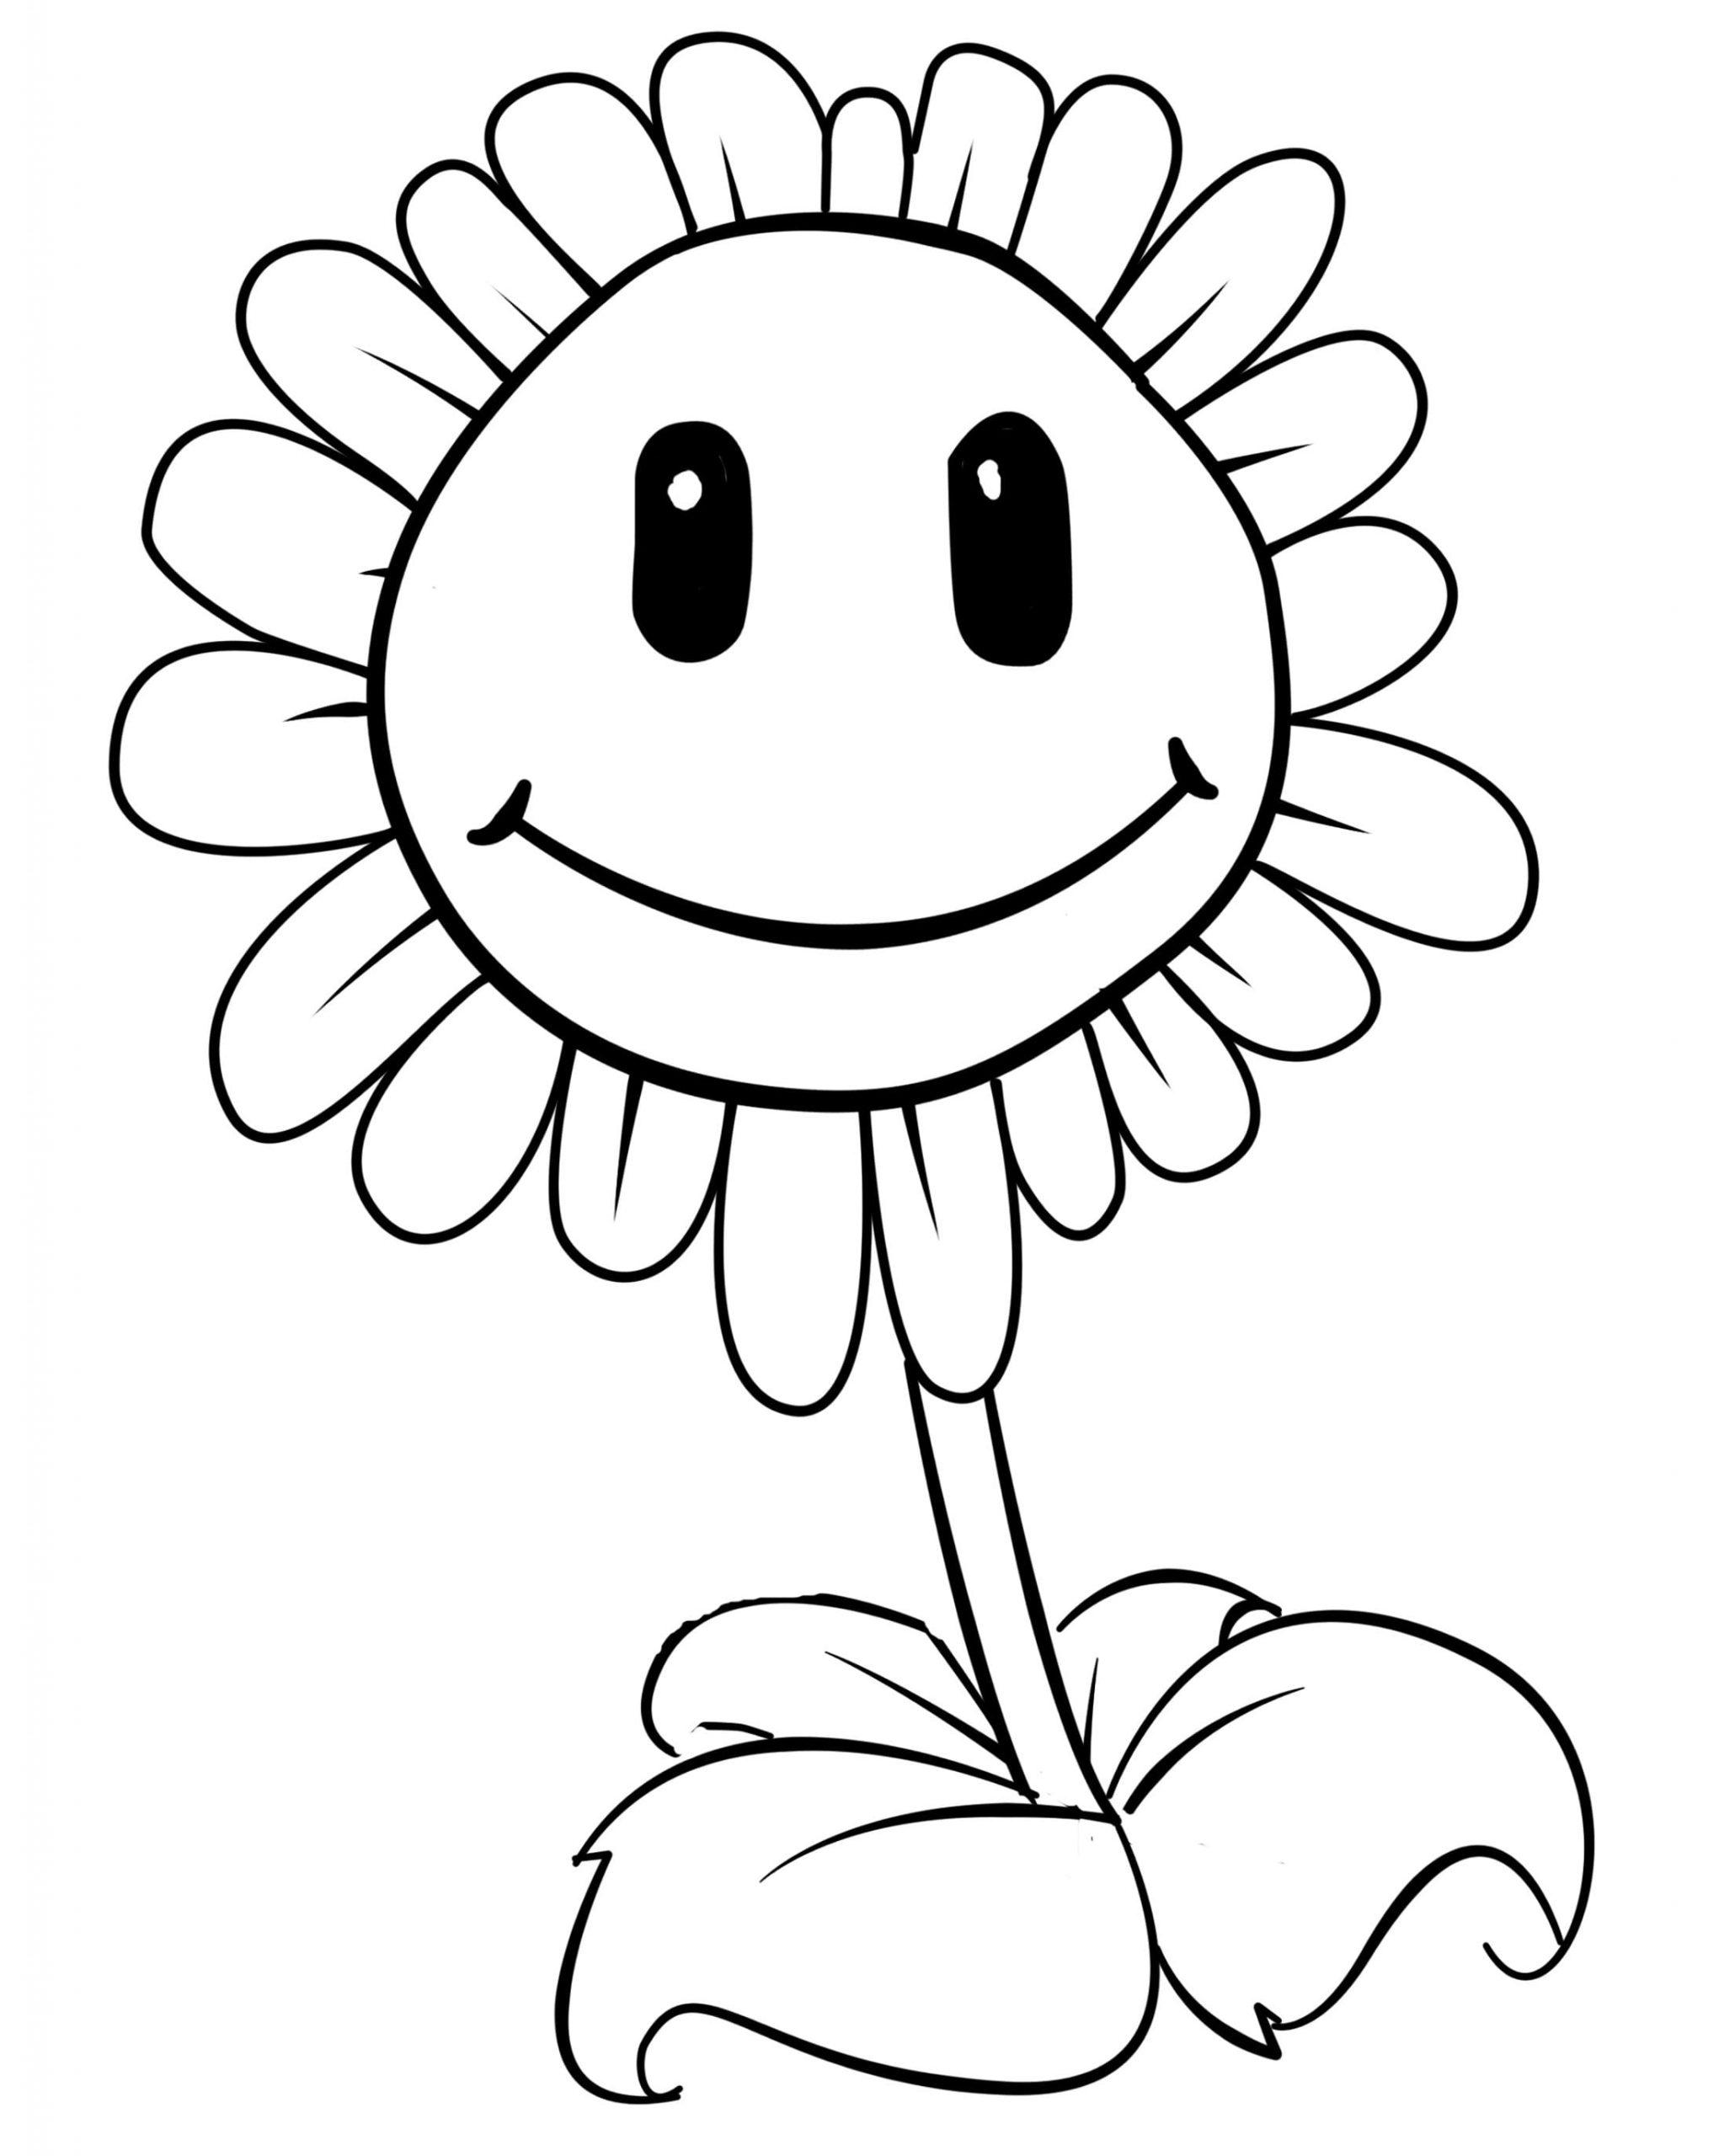 Smiling Sunflower Coloring Pages - Plants vs Zombies Coloring Pages -  Coloring Pages For Kids And Adults